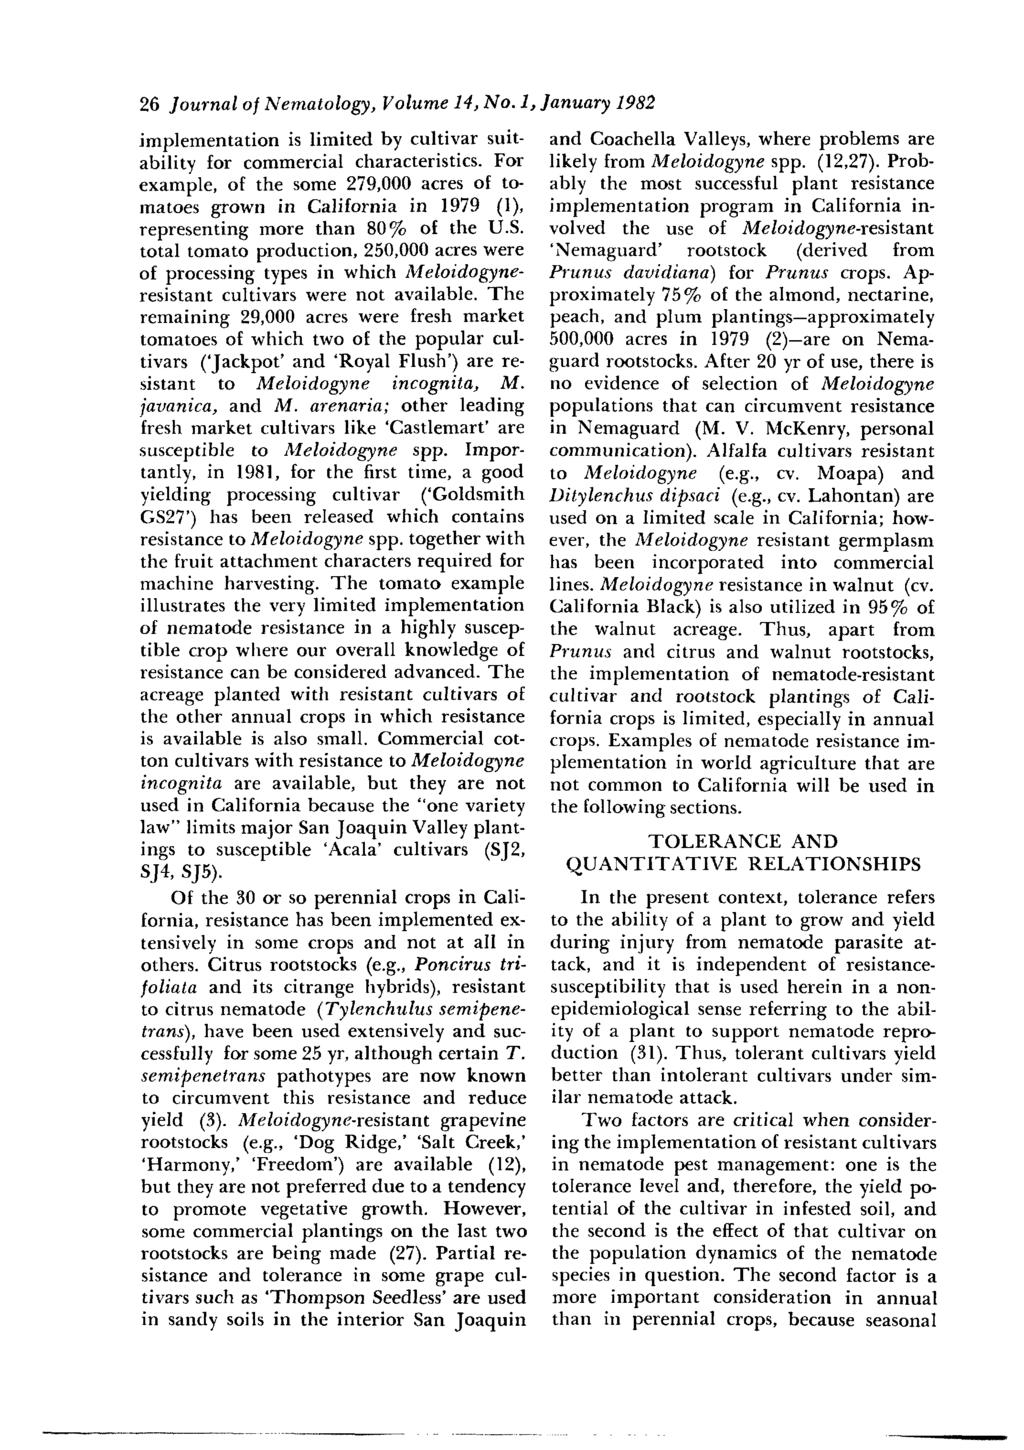 26 Journal of Nematology, Volume 14, No. 1, January 1982 implementation is limited by cultivar suitability for commercial characteristics.